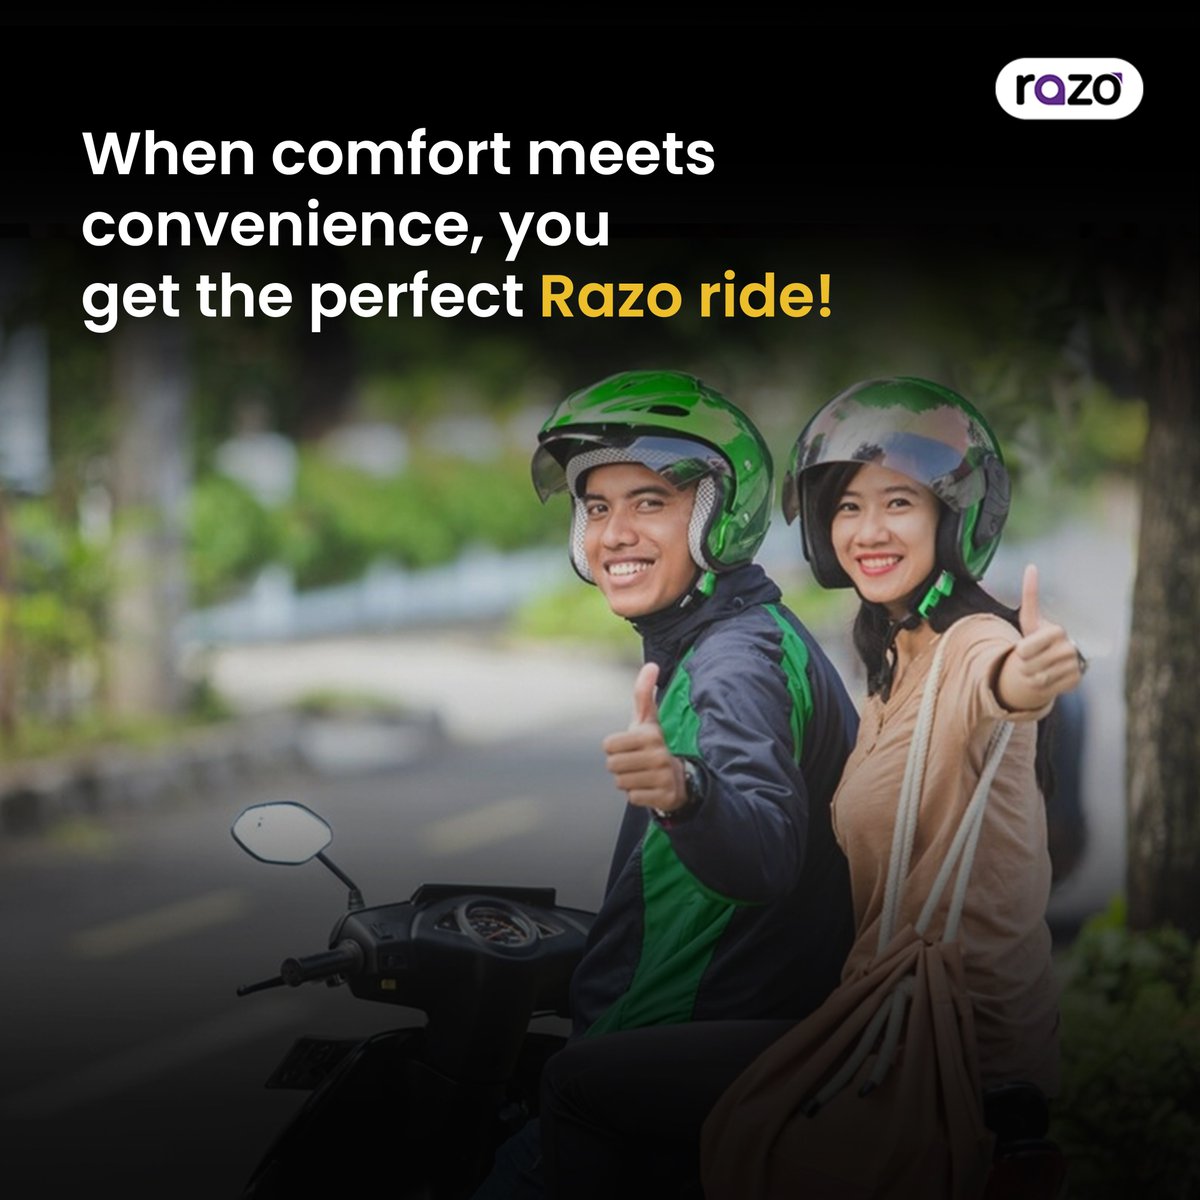 The bike that drops you at your office on time, takes you to that restaurant on your pay day #razoautoservice #kakinada #vijayawada #nellore #guntur #Rajahmundry #ComfortRide #convenience #razoride #ride #reachyourlocation #superdriver #shebike #shedriving #saferide #applaunch